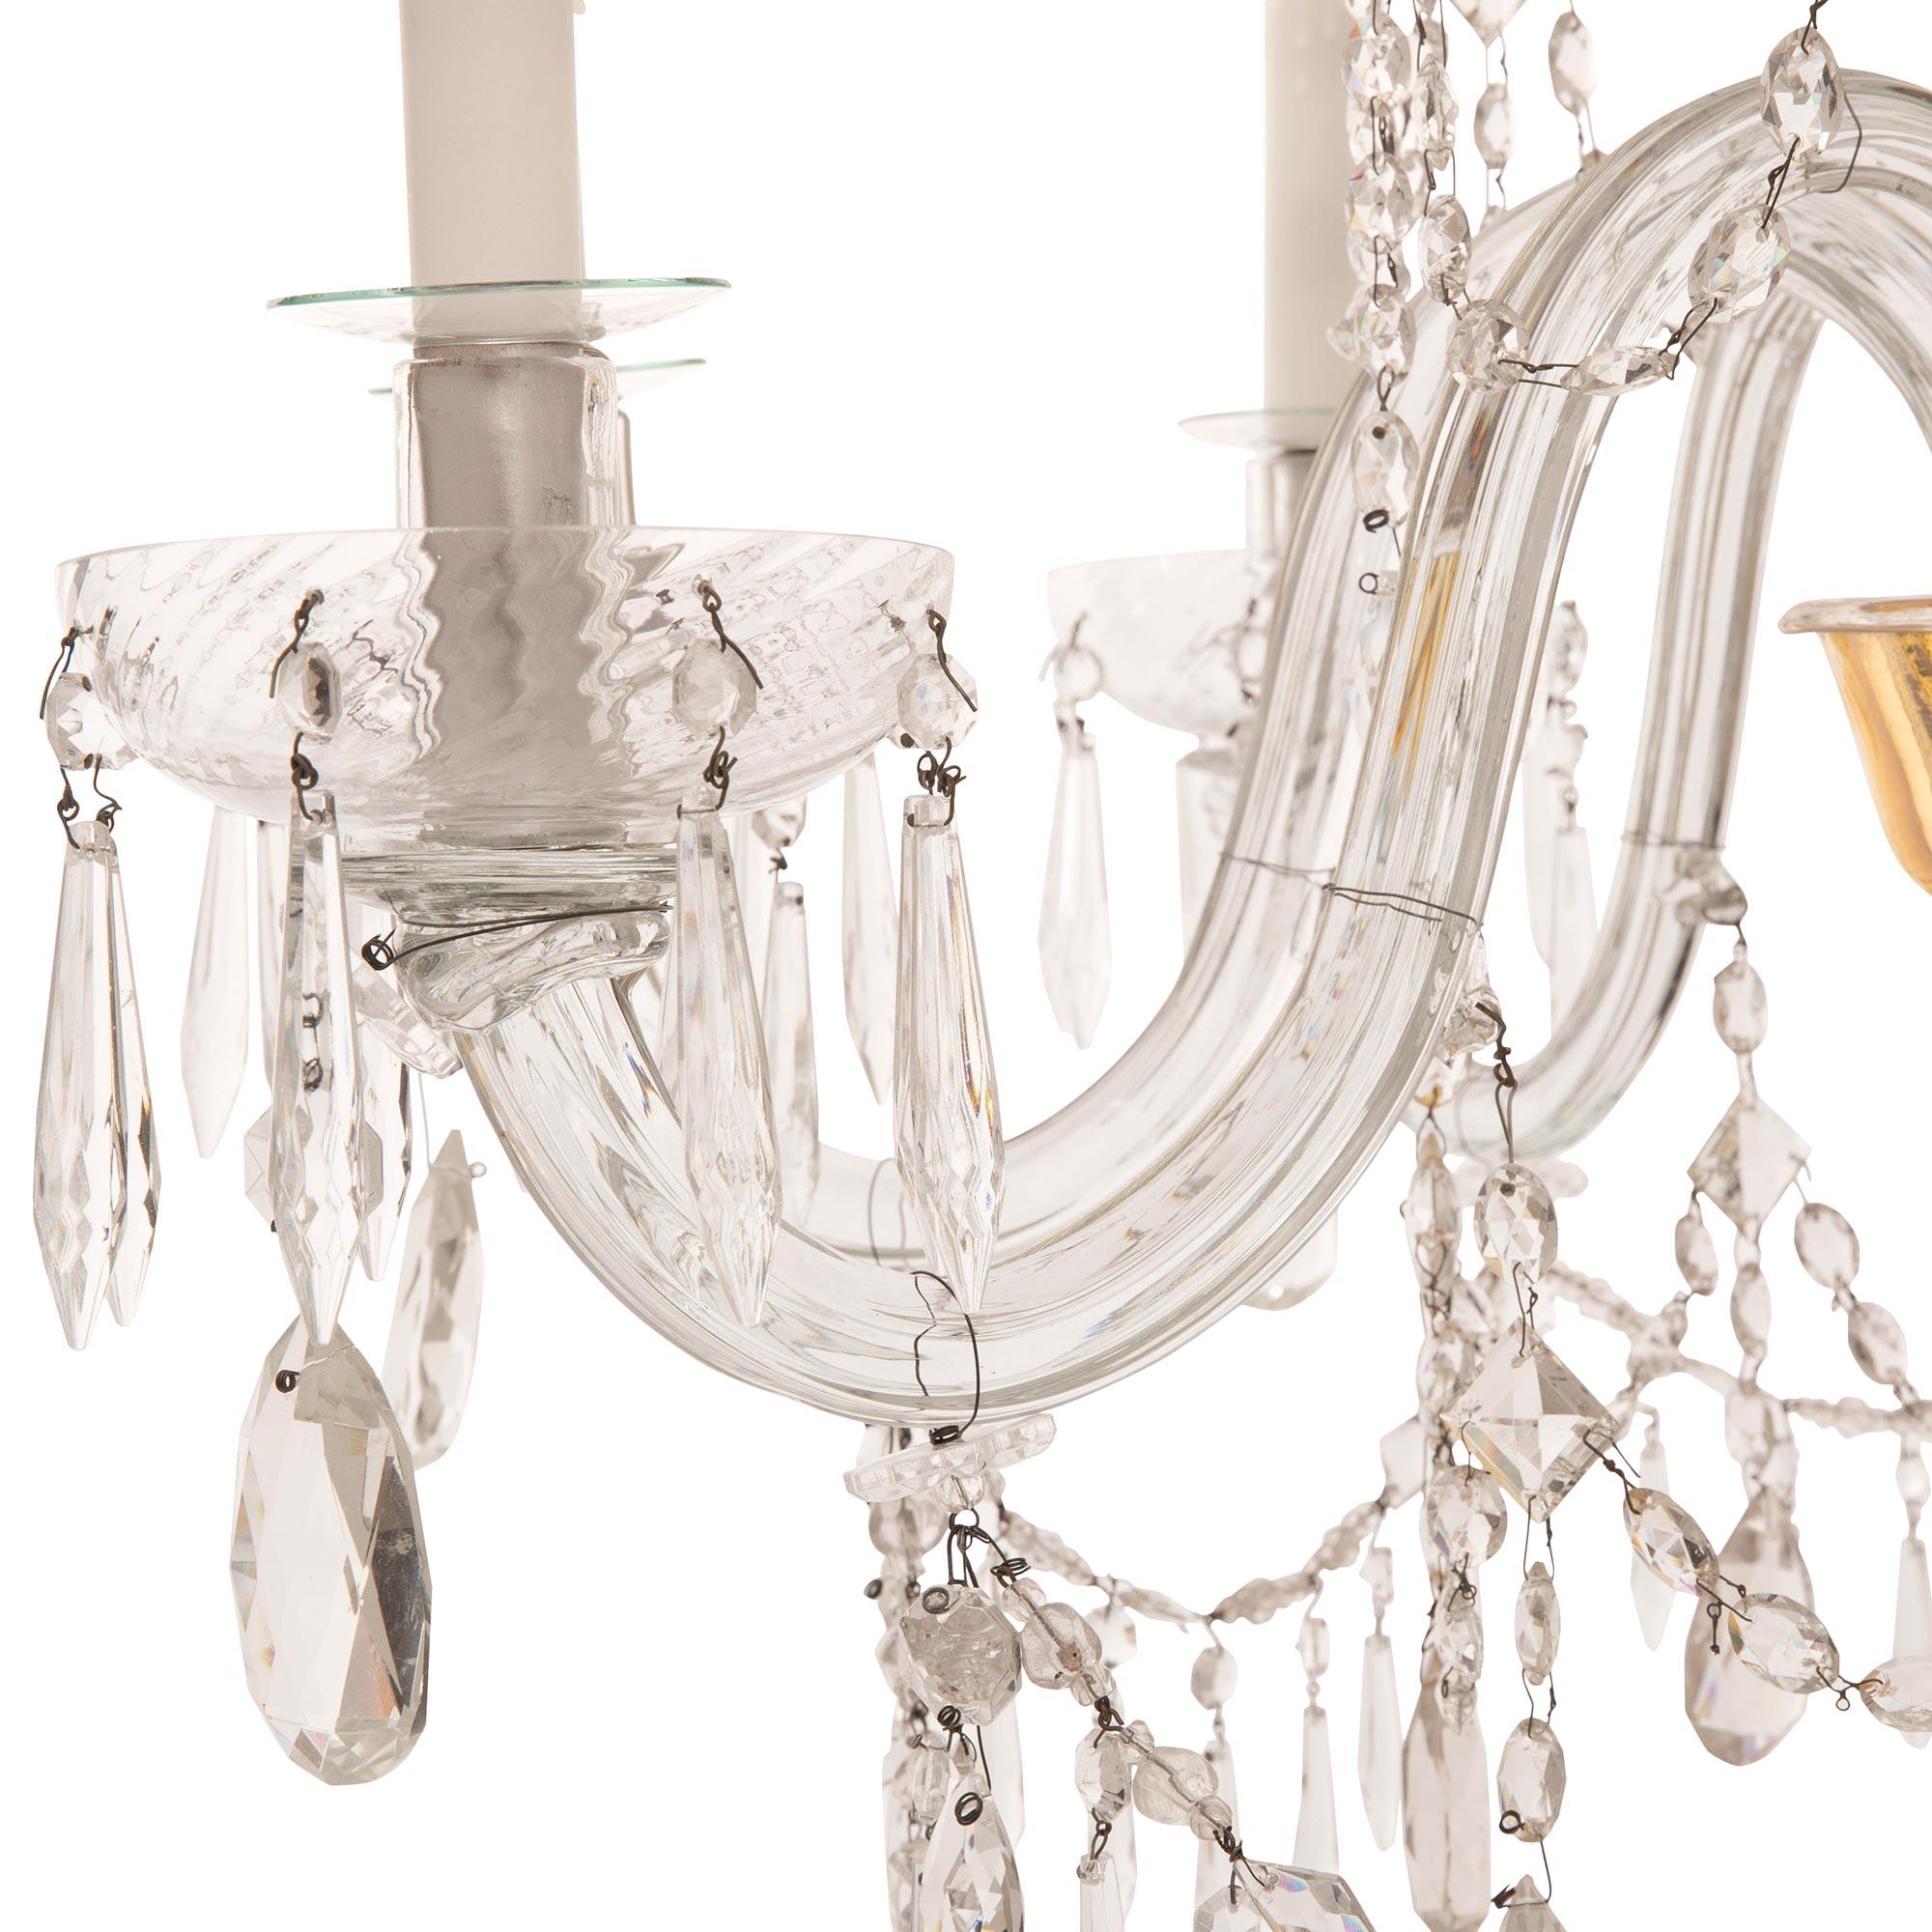 Italian 18th Century Venetian St. Murano Glass and Giltwood Chandelier For Sale 3